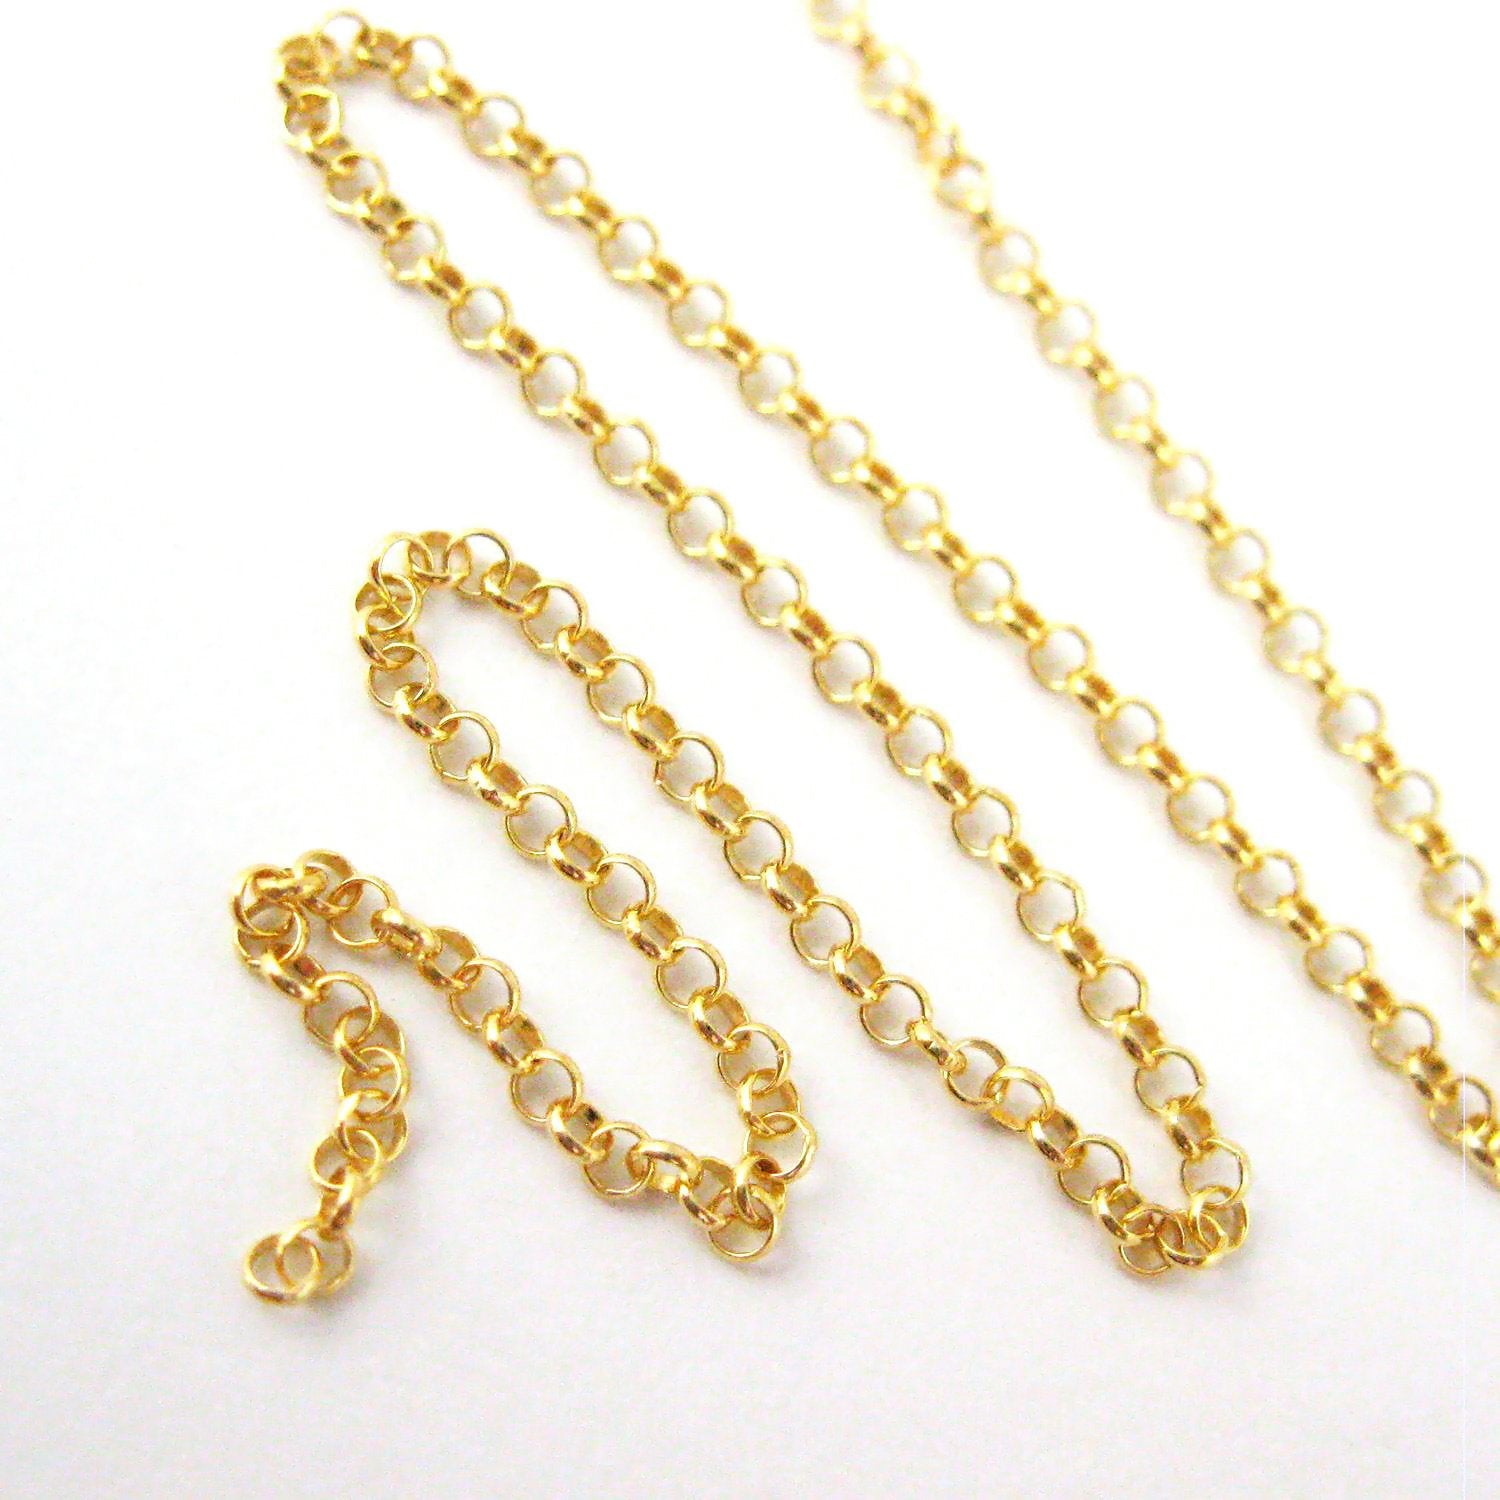 10K Yellow Gold 2.5mm Rolo Chain